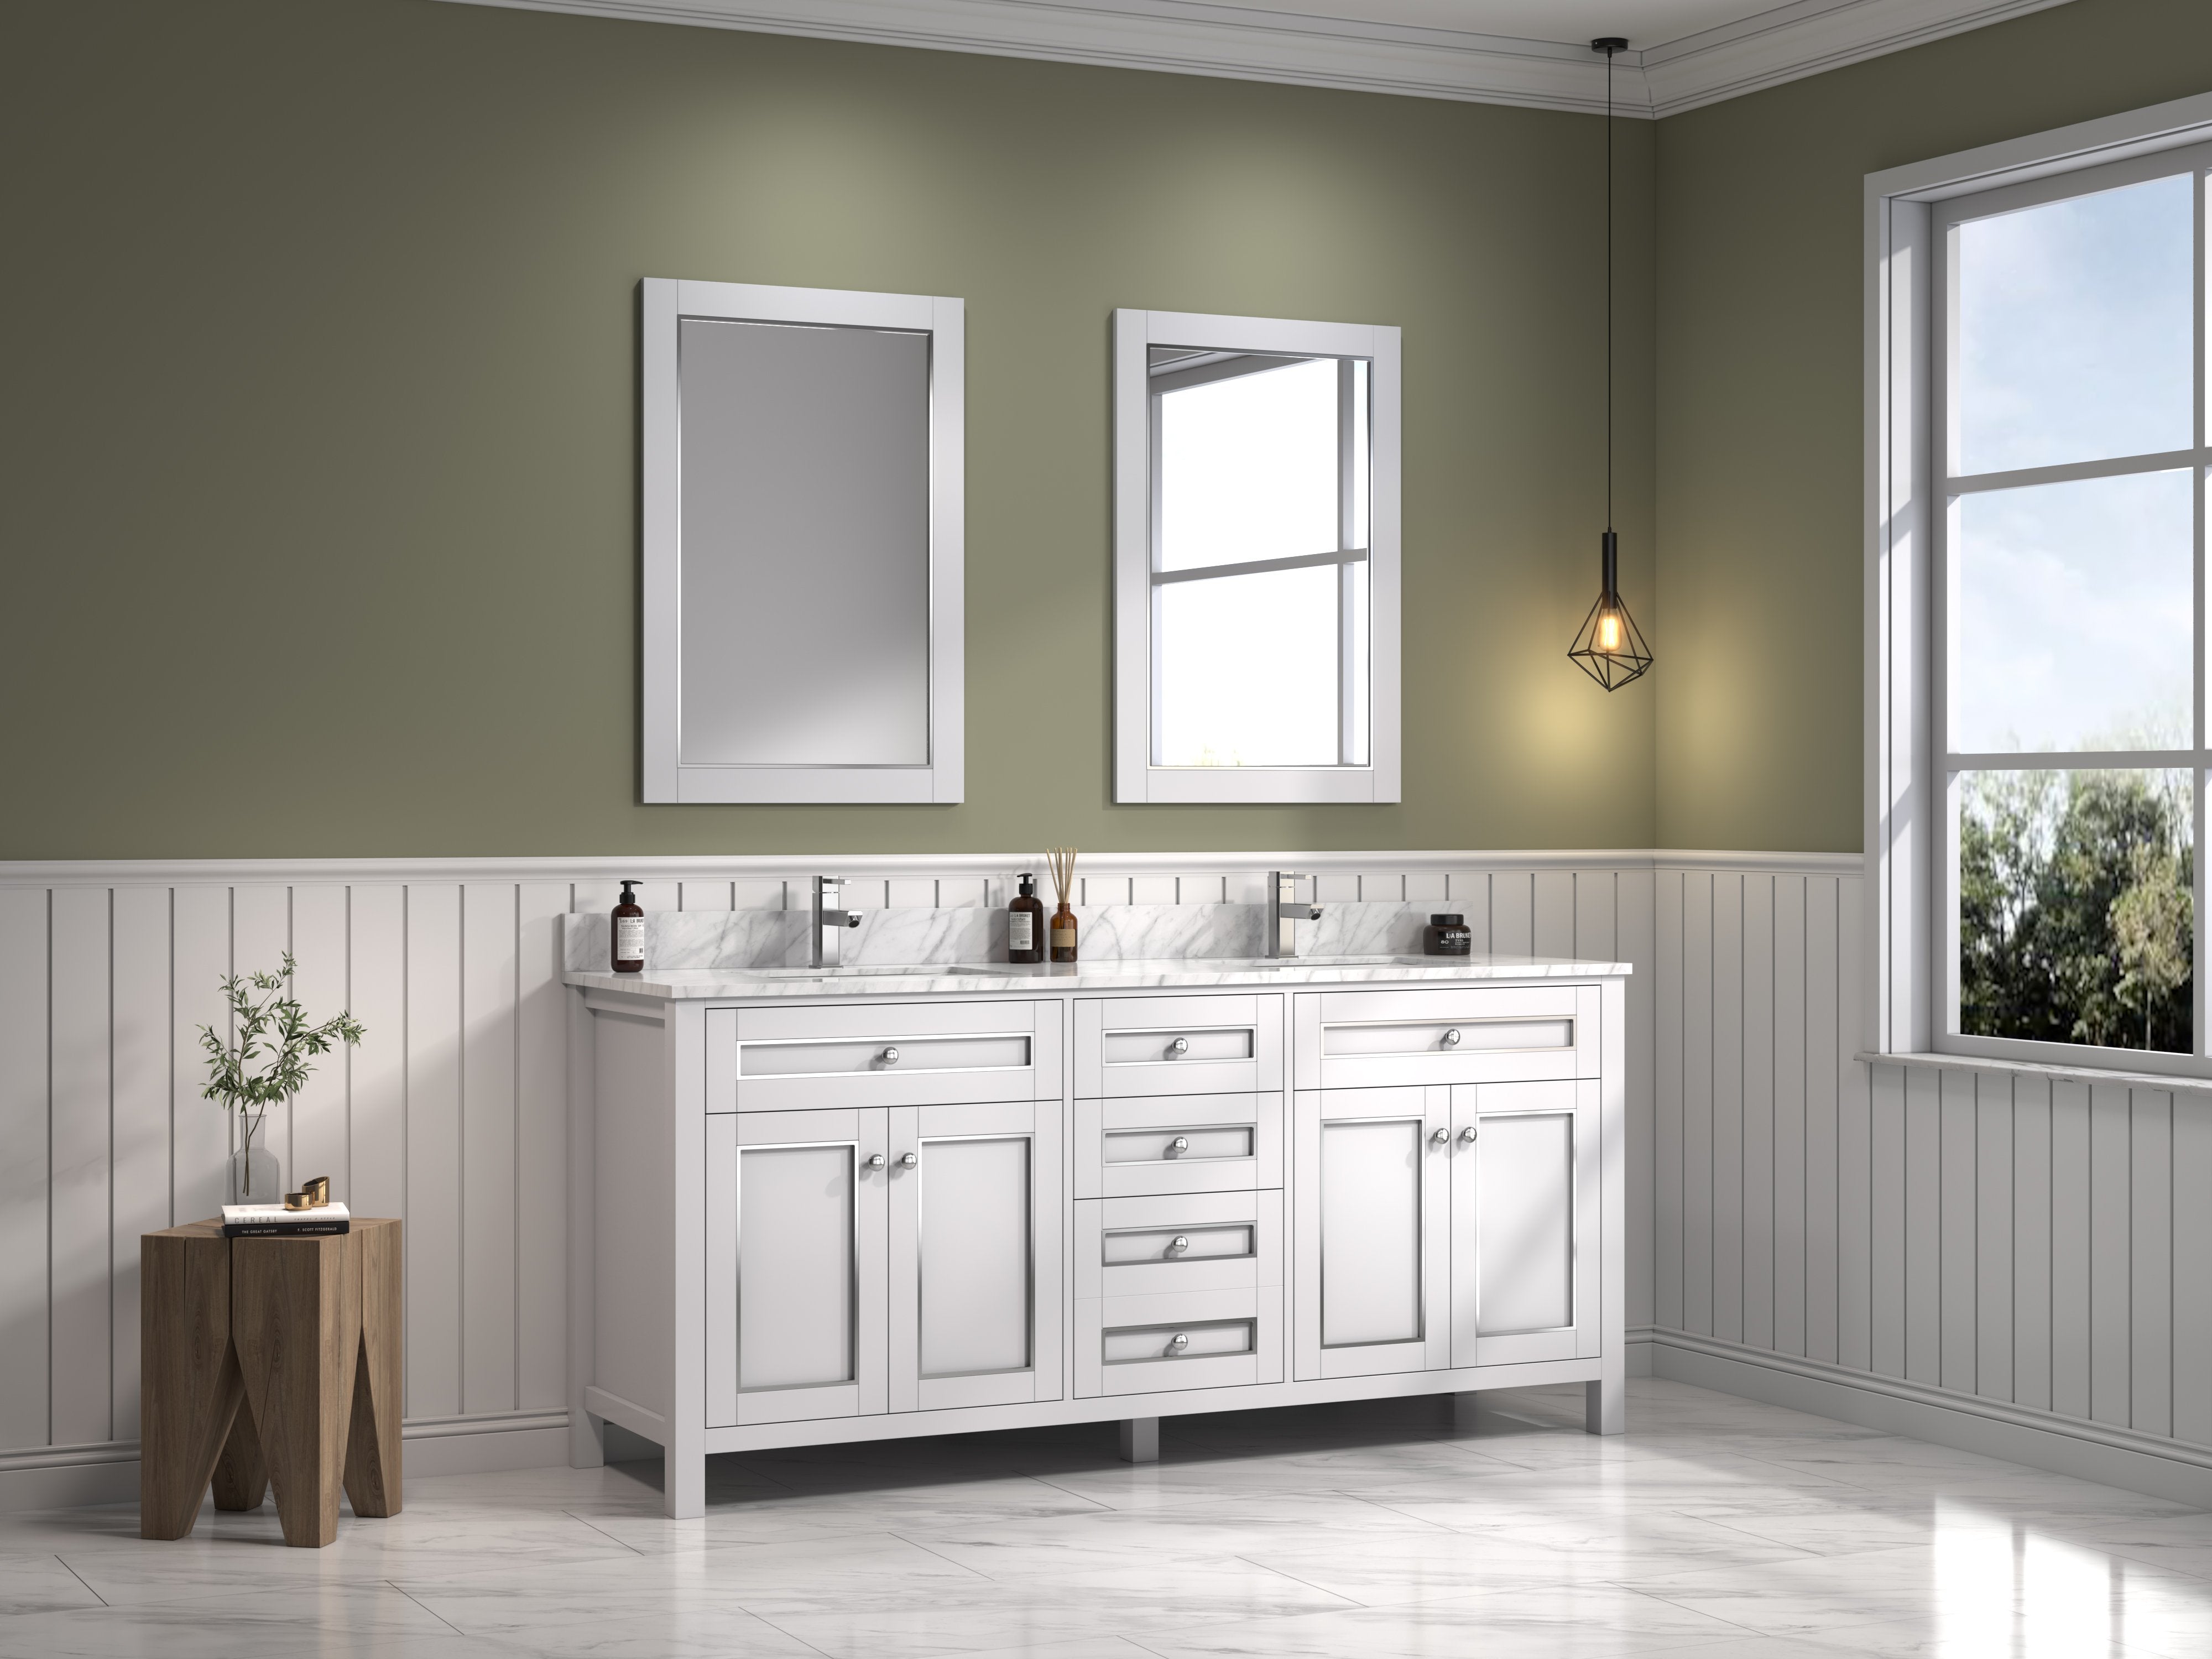 72" Sink Vanity Cabinet With Carrera White Top